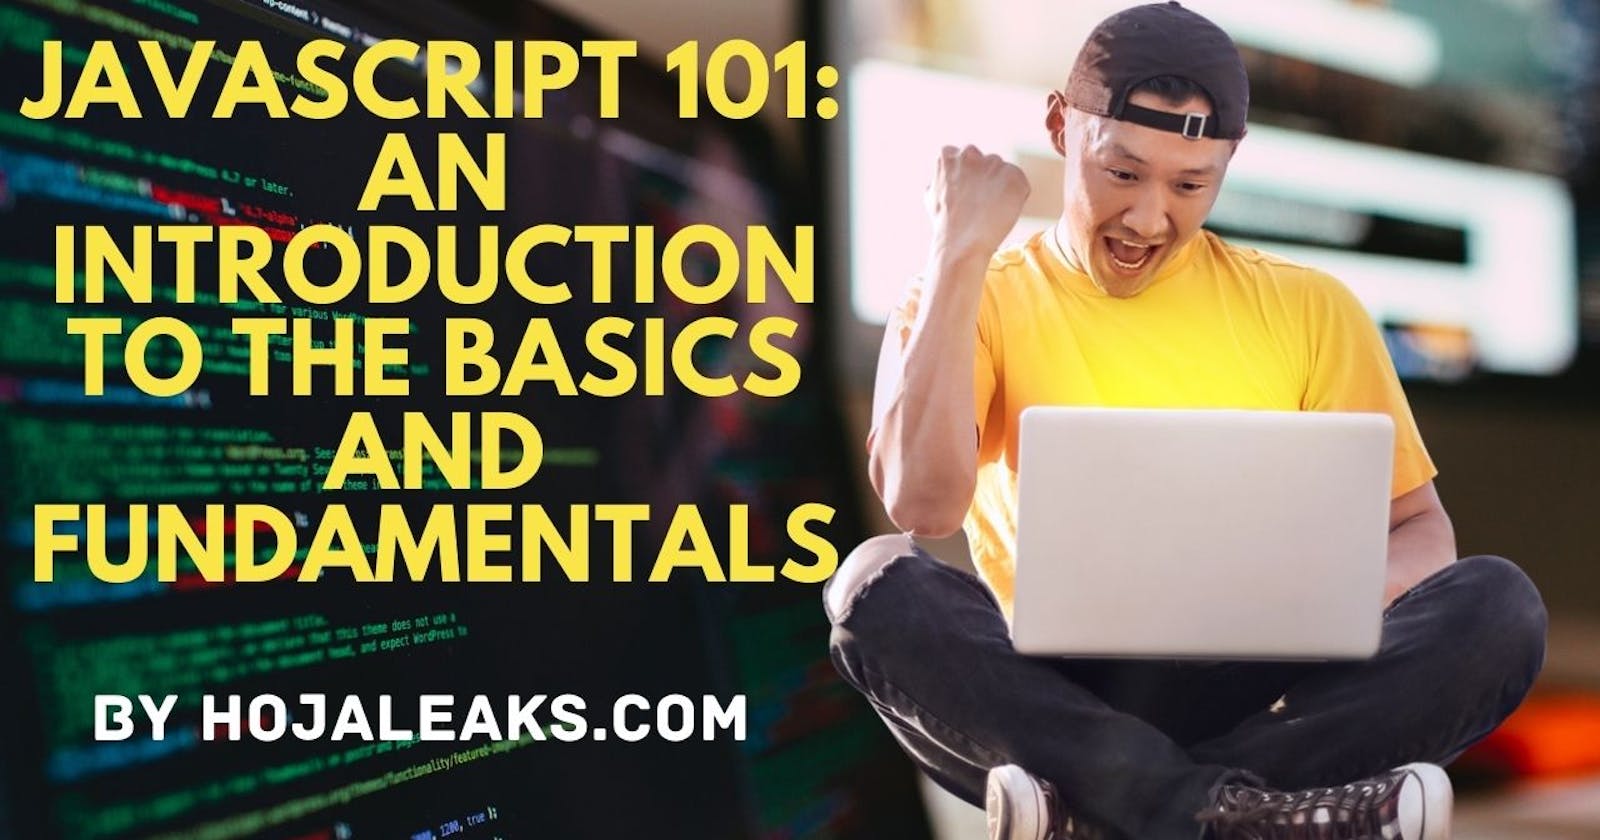 JavaScript 101: An Introduction to the Basics and Fundamentals of the Language